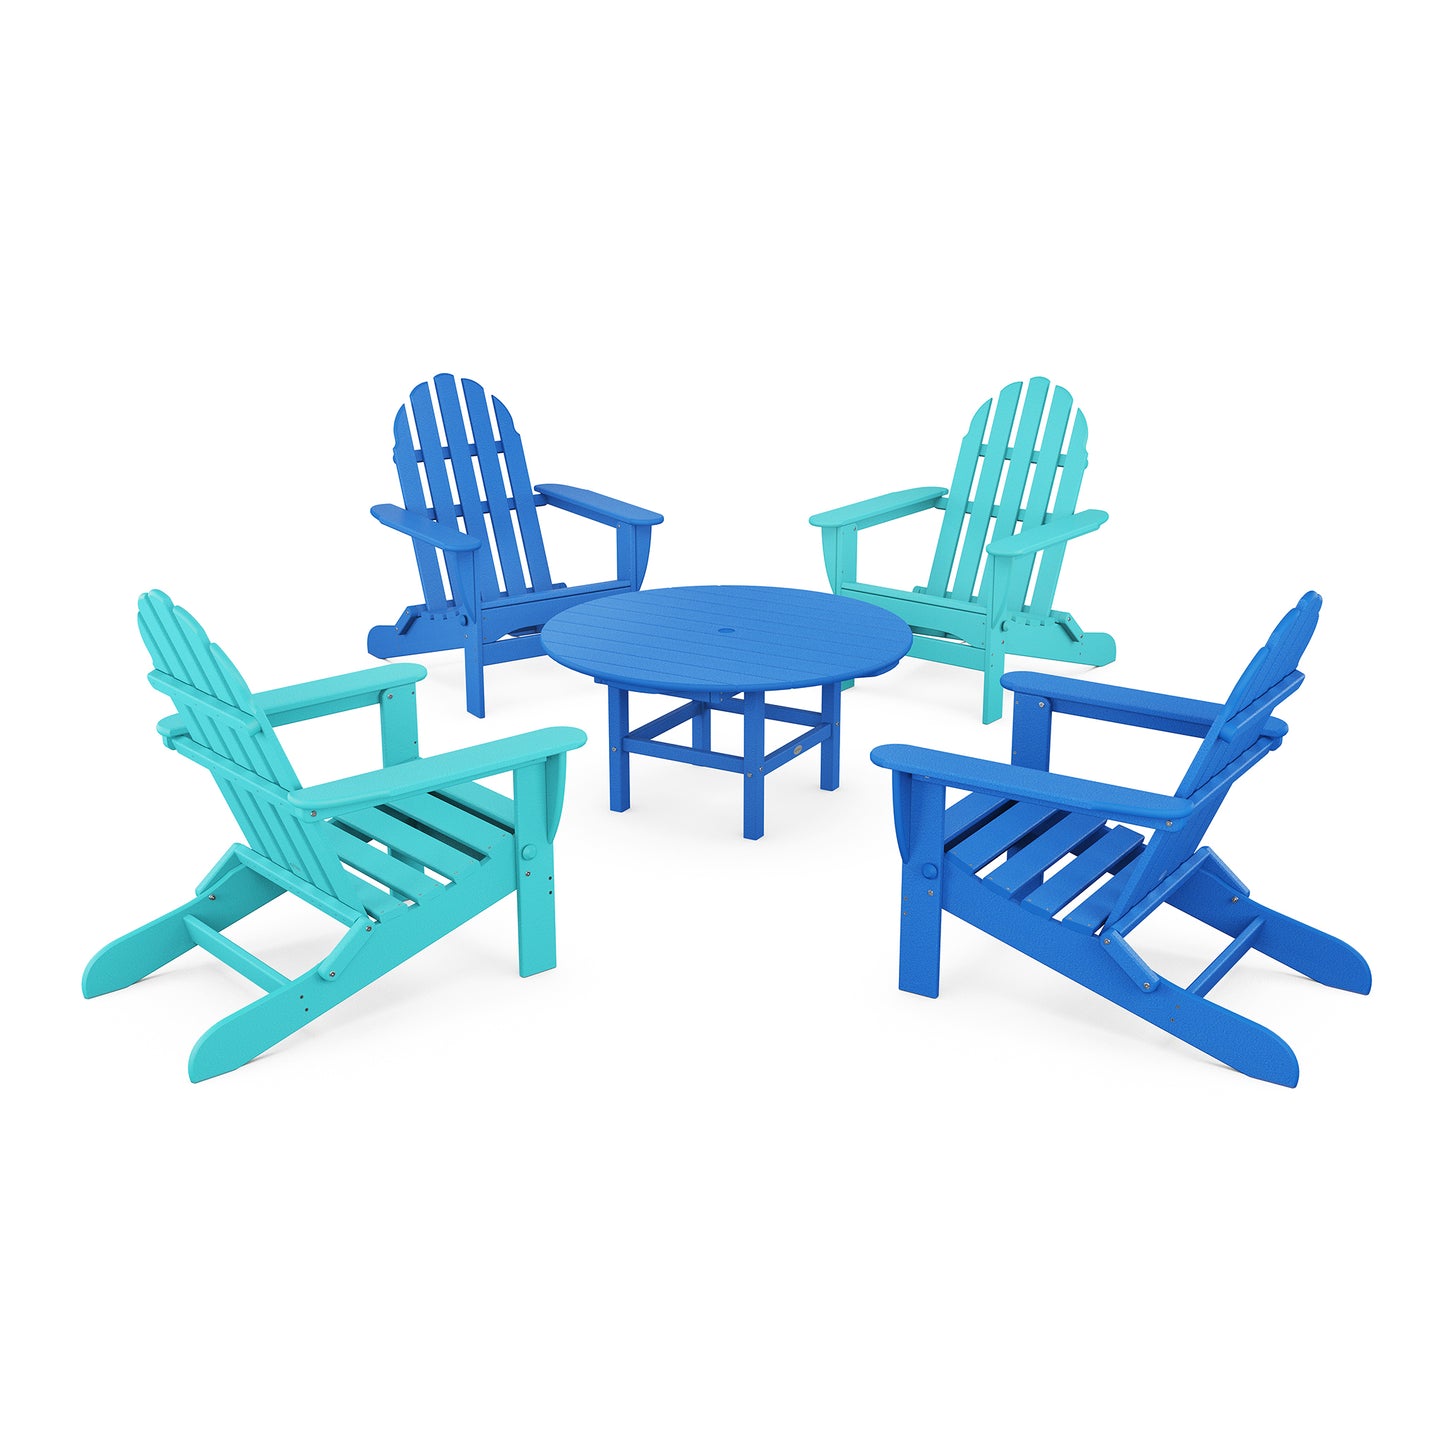 Four colorful POLYWOOD Classic Folding Adirondack chairs in teal and blue arranged around a small round matching table, isolated on a white background.